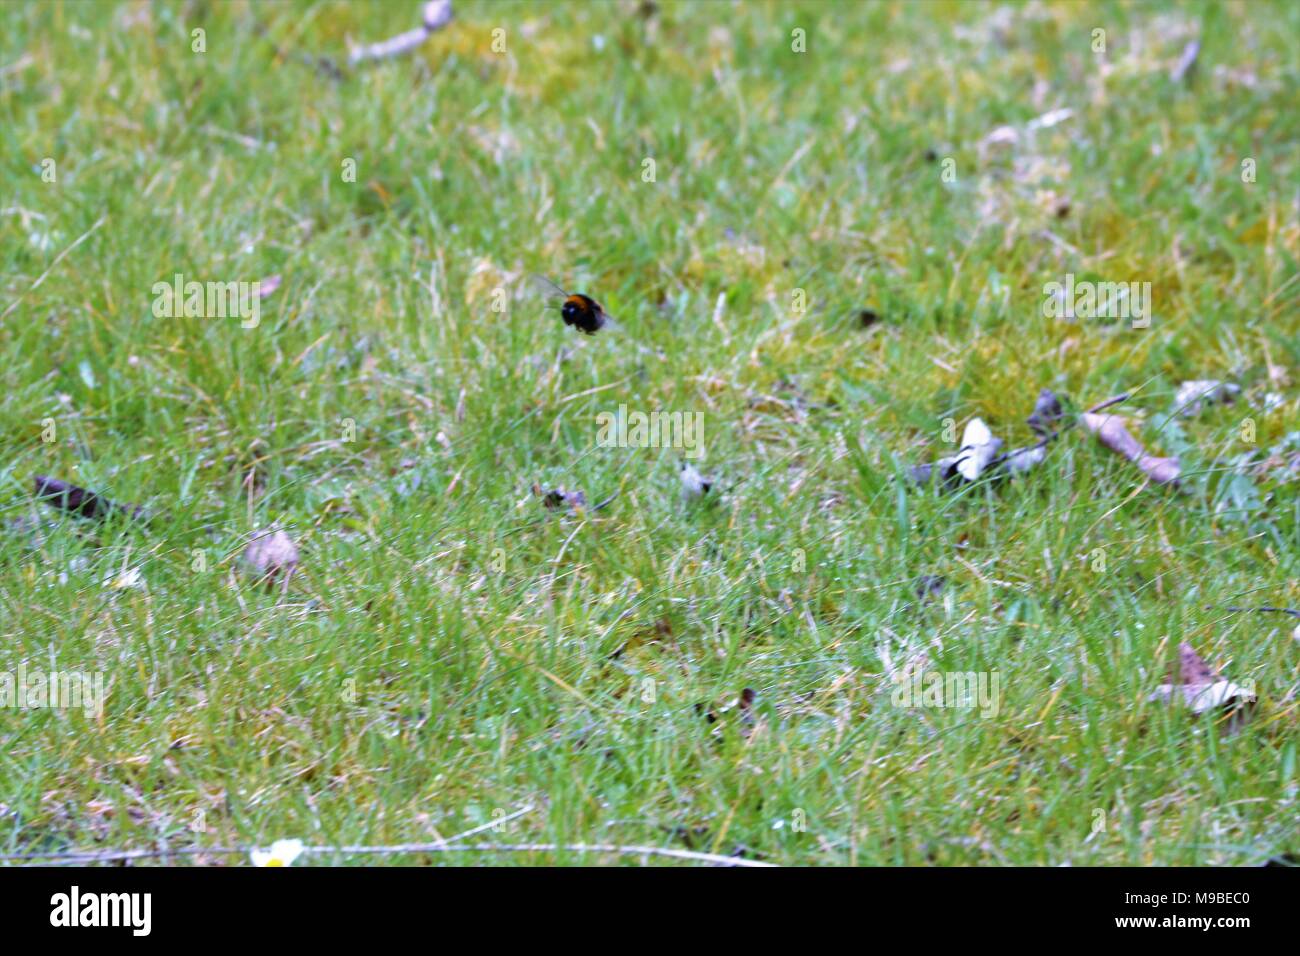 Bumble bee in flight in grass in Spring Stock Photo